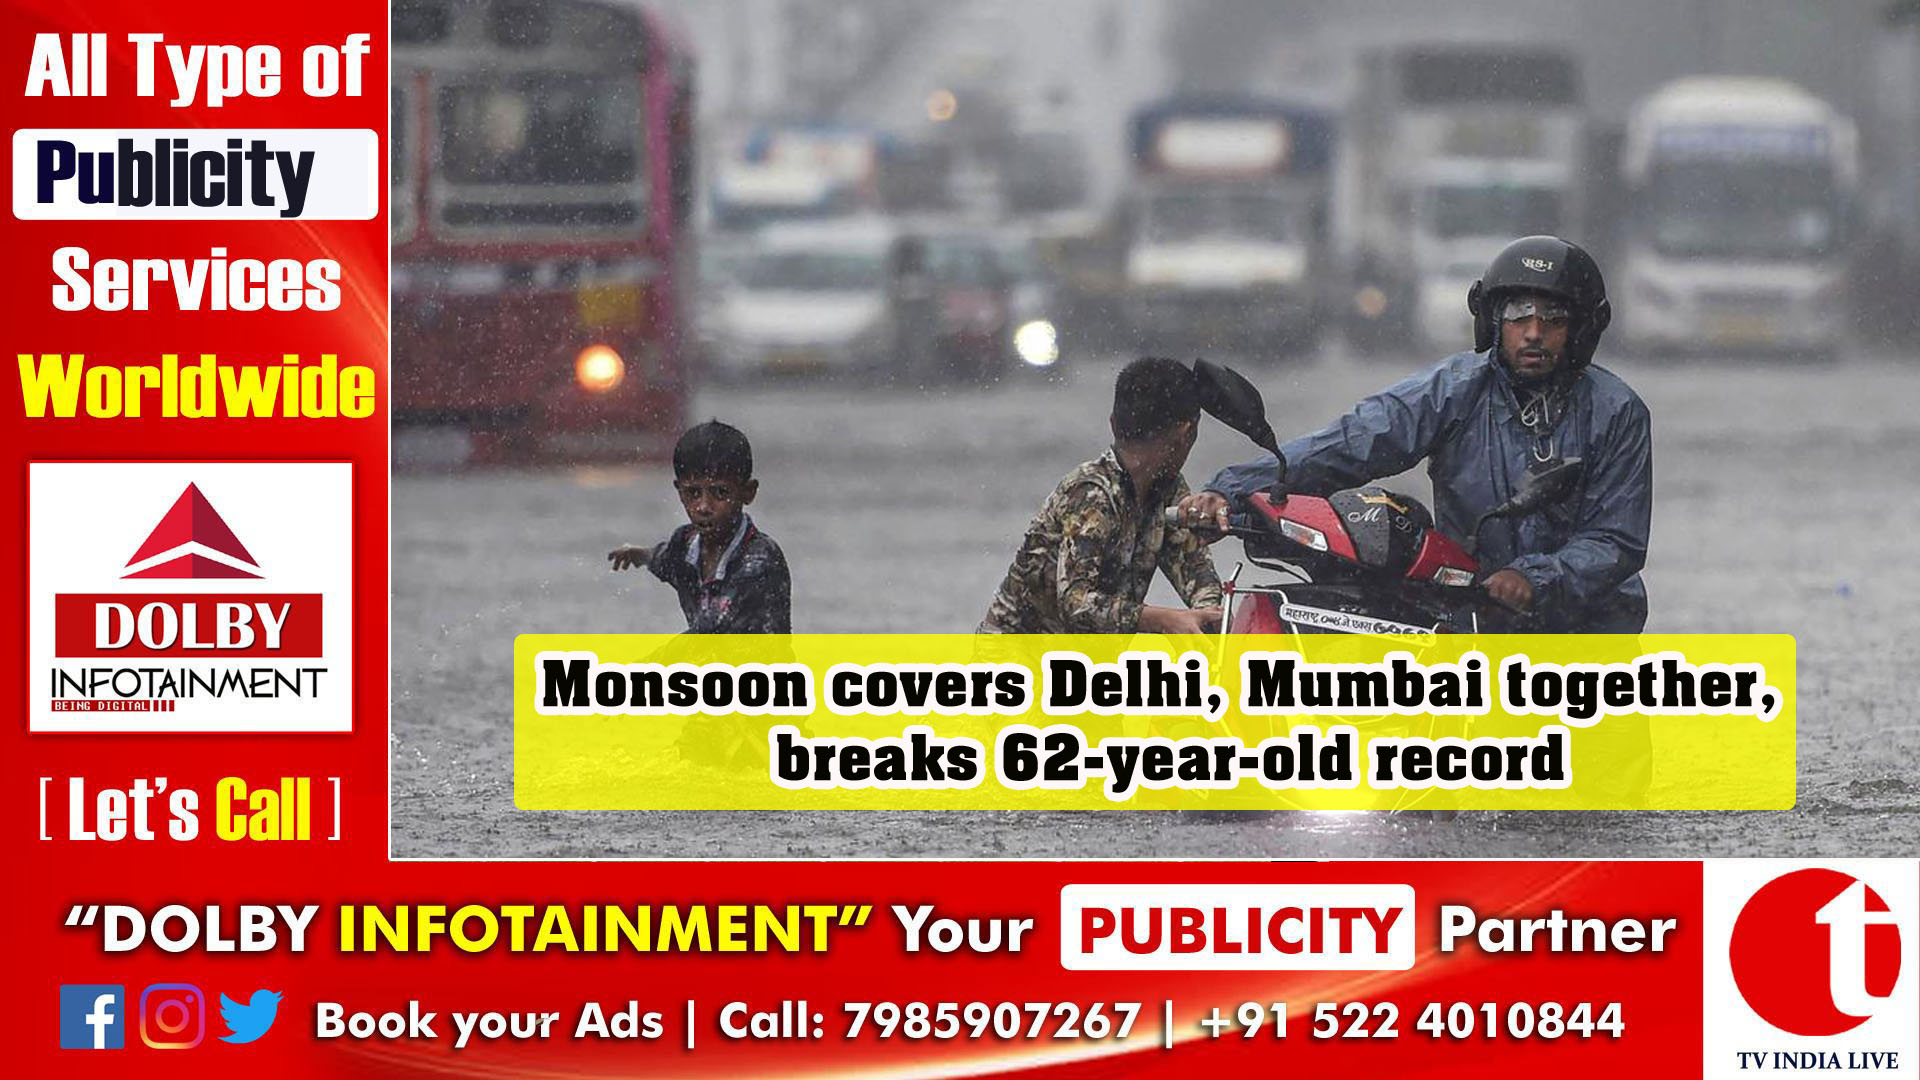 Monsoon covers Delhi, Mumbai together, breaks 62-year-old record